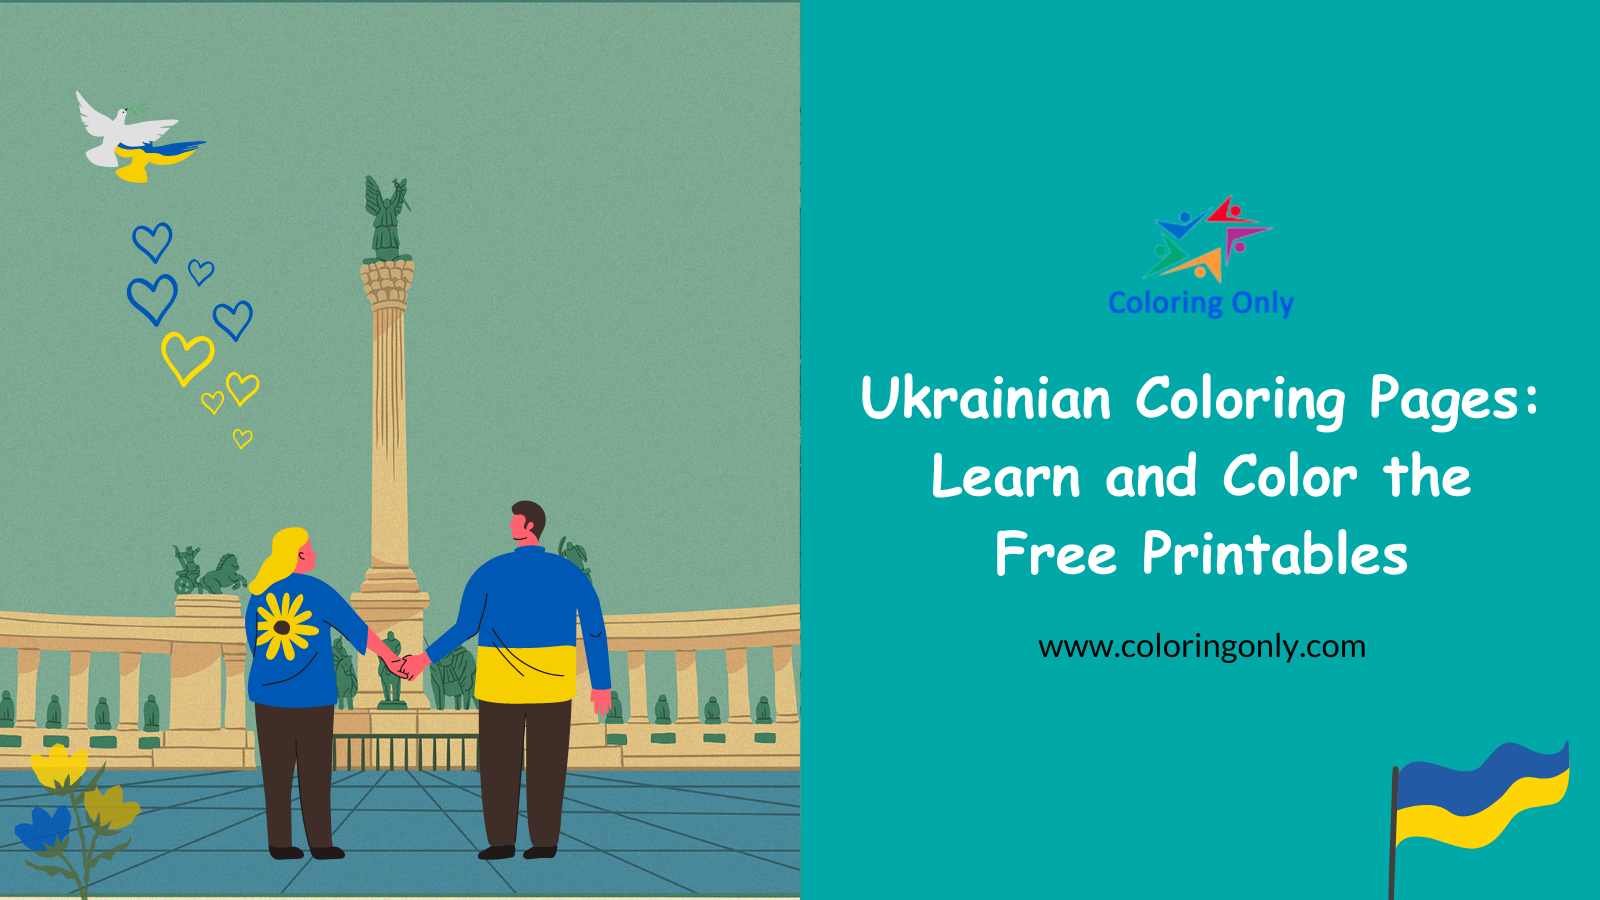 Ukrainian Coloring Pages: Learn and Color the Free Printables